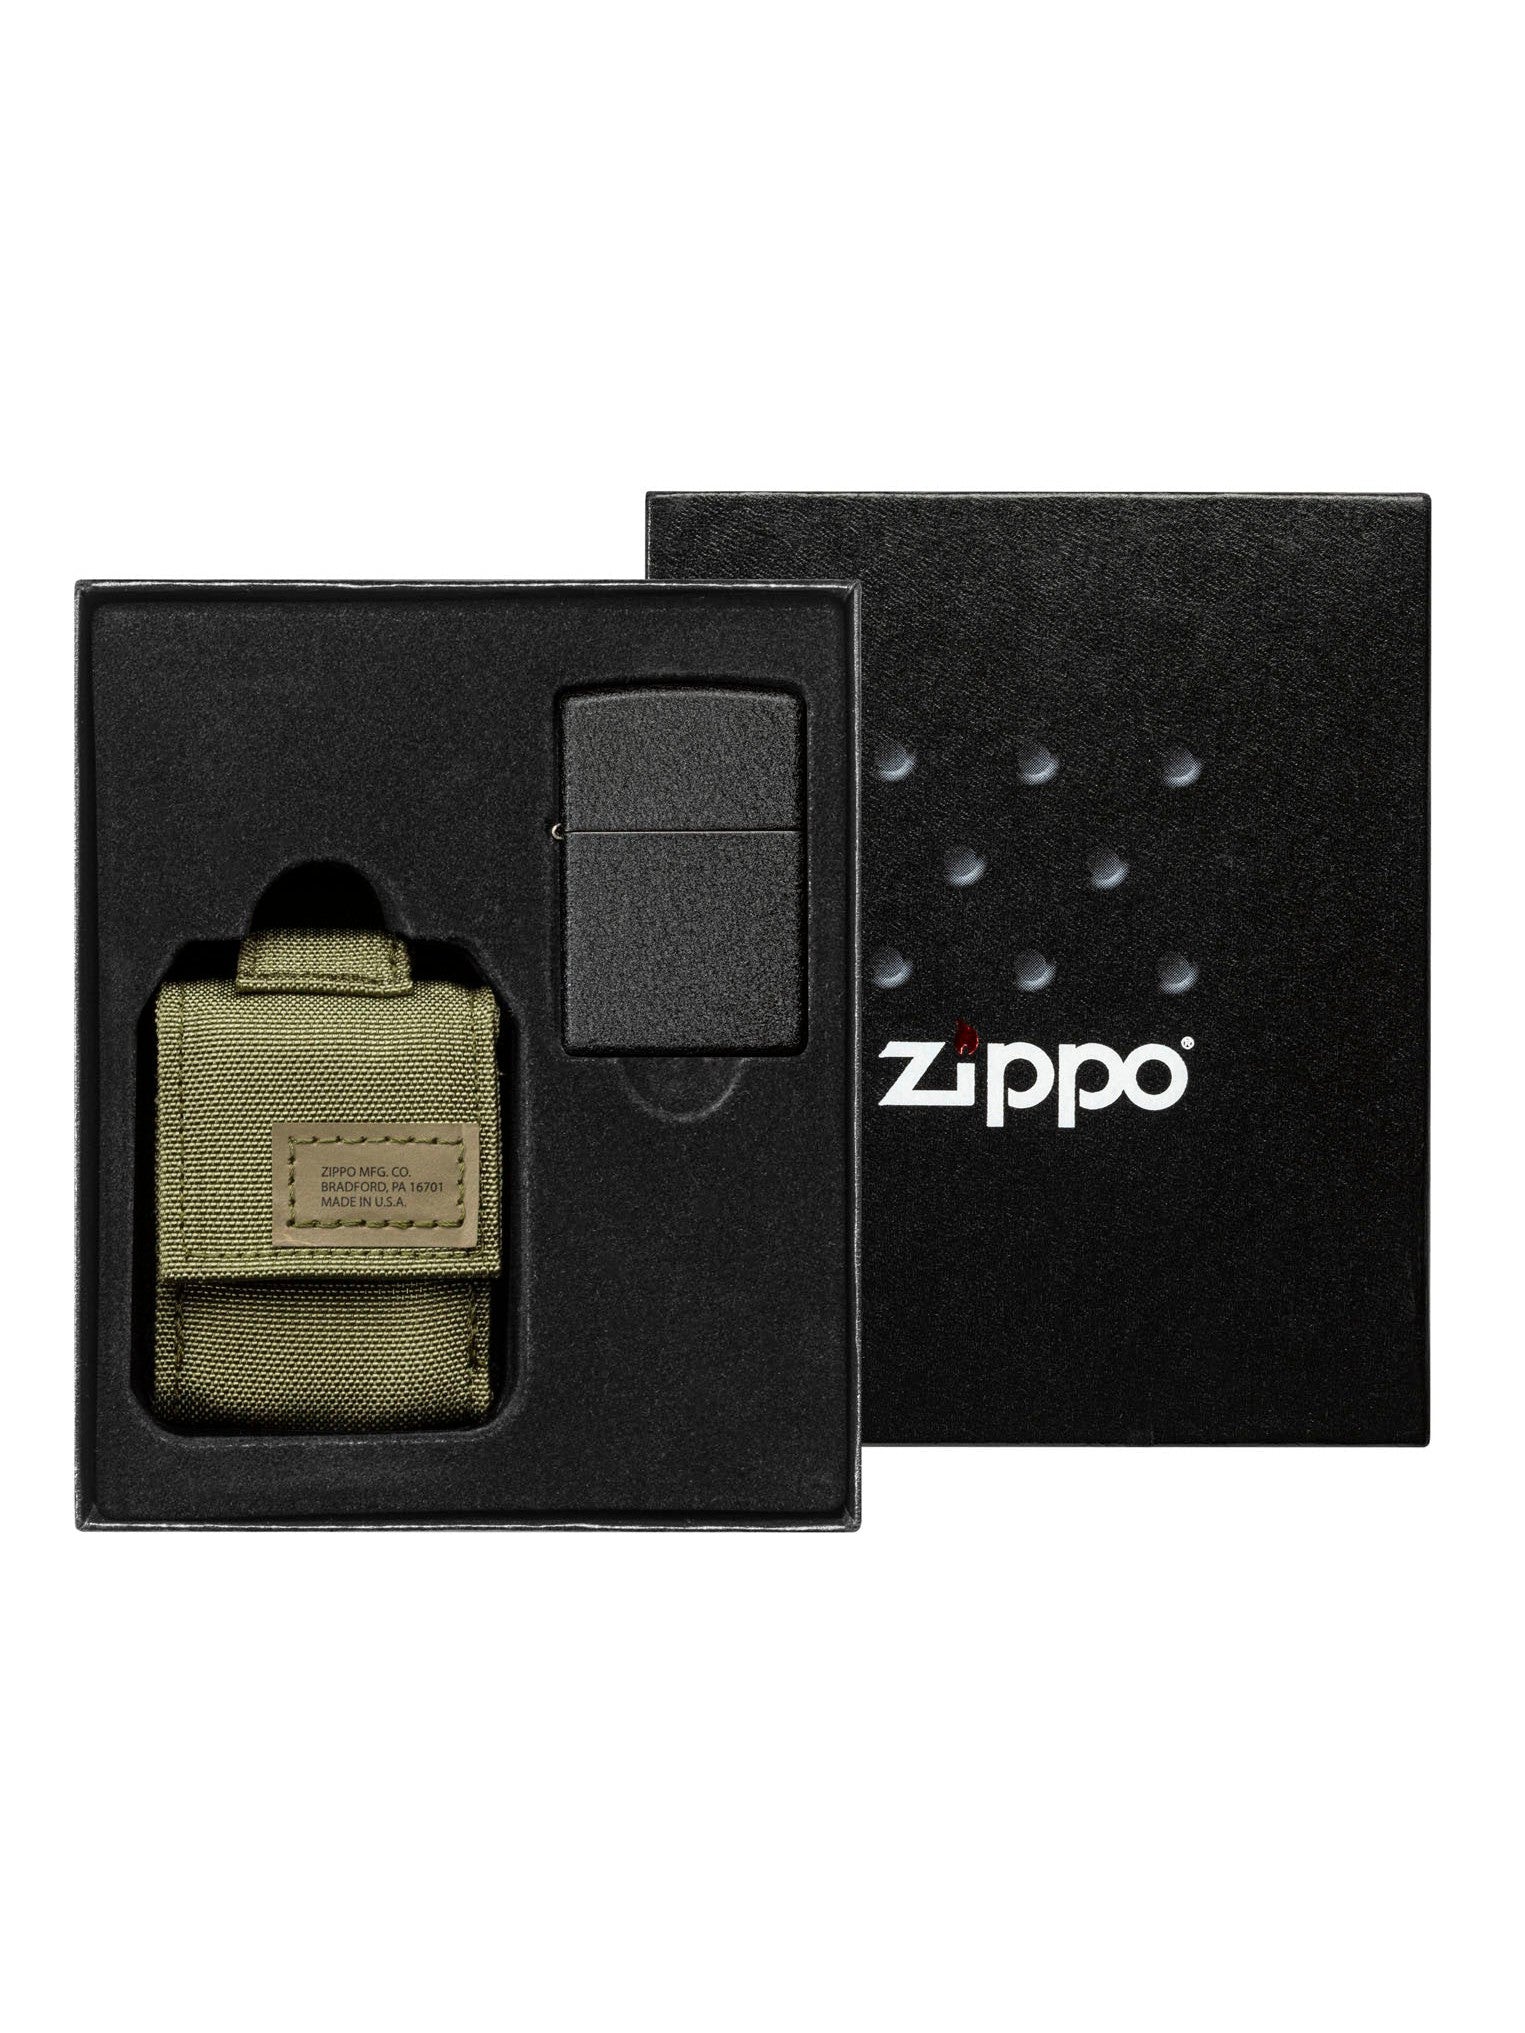 Zippo Black Crackle Lighter and Green MOLLE Pouch - 49400